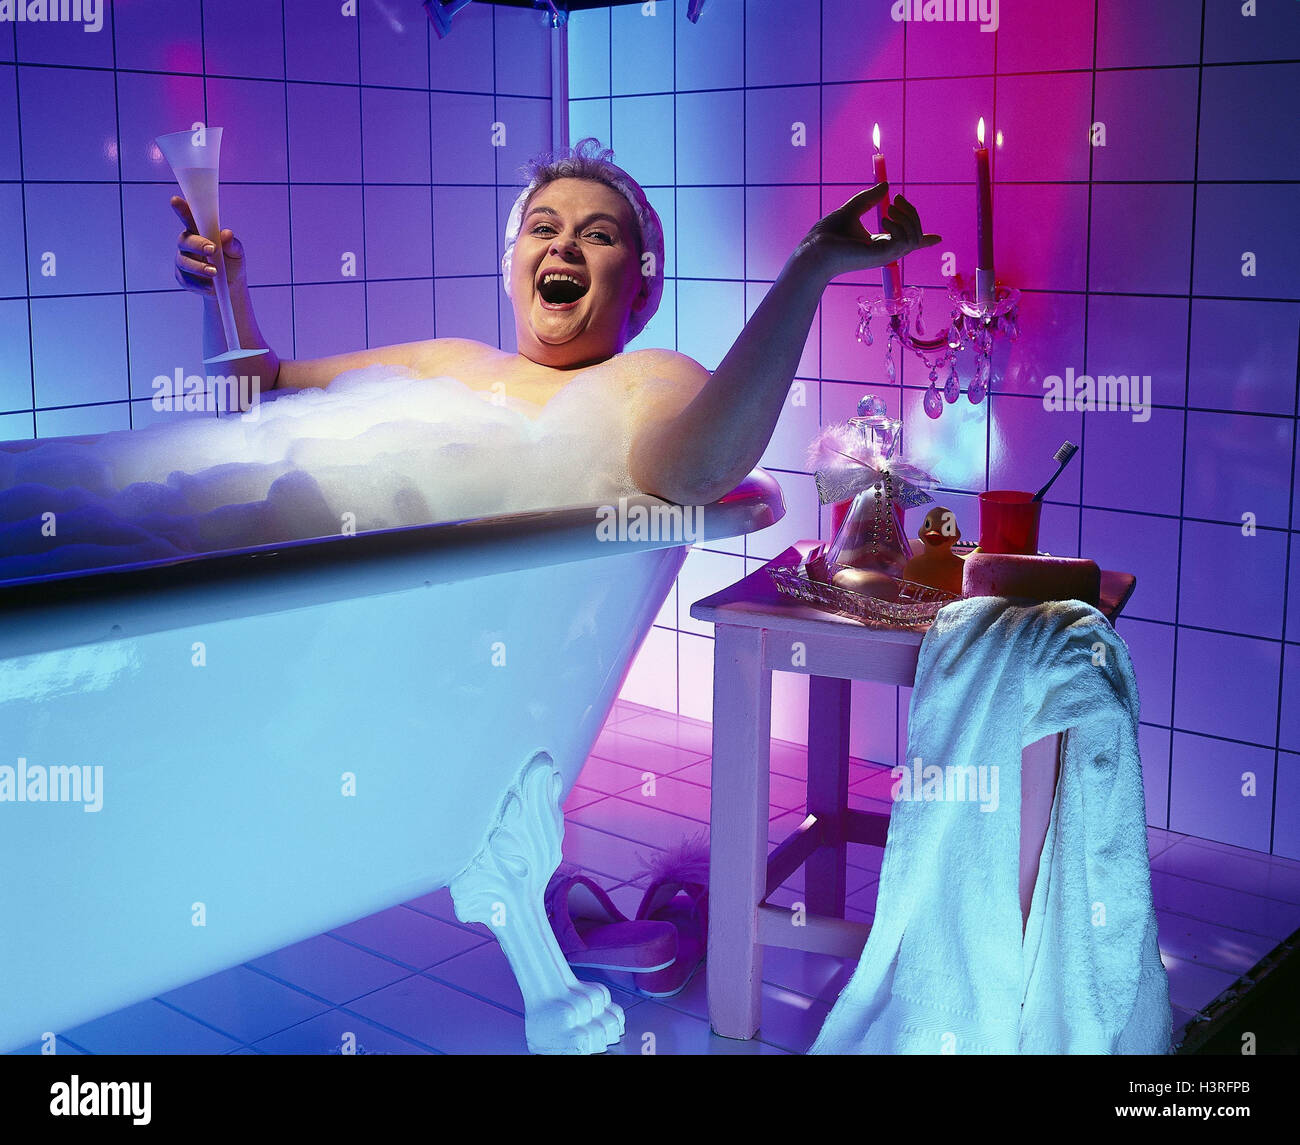 Bath, woman, bath, glass, Sparkling Wine, candles, happy, have of a bath, proper bath, bubble bath, bath froth, have of a bath, personal care, care, hygiene, body hygiene, melted, joy, leisure time, recover Stock Photo